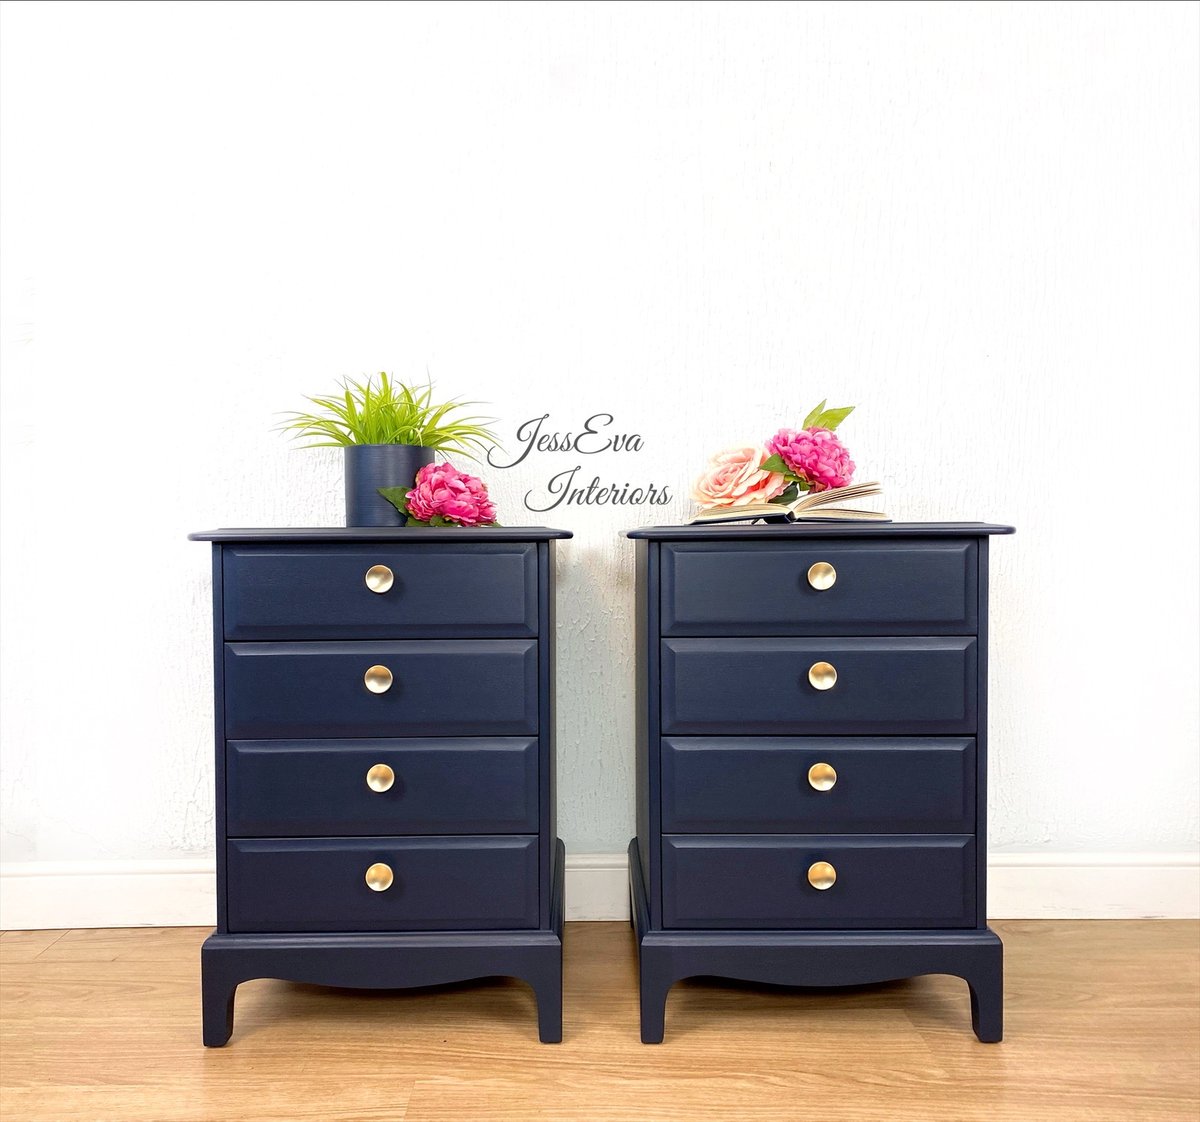 Pair of Stag Minstrel Bedside Tables / Bedside Cabinets / Chest Of Drawers painted in navy blue 